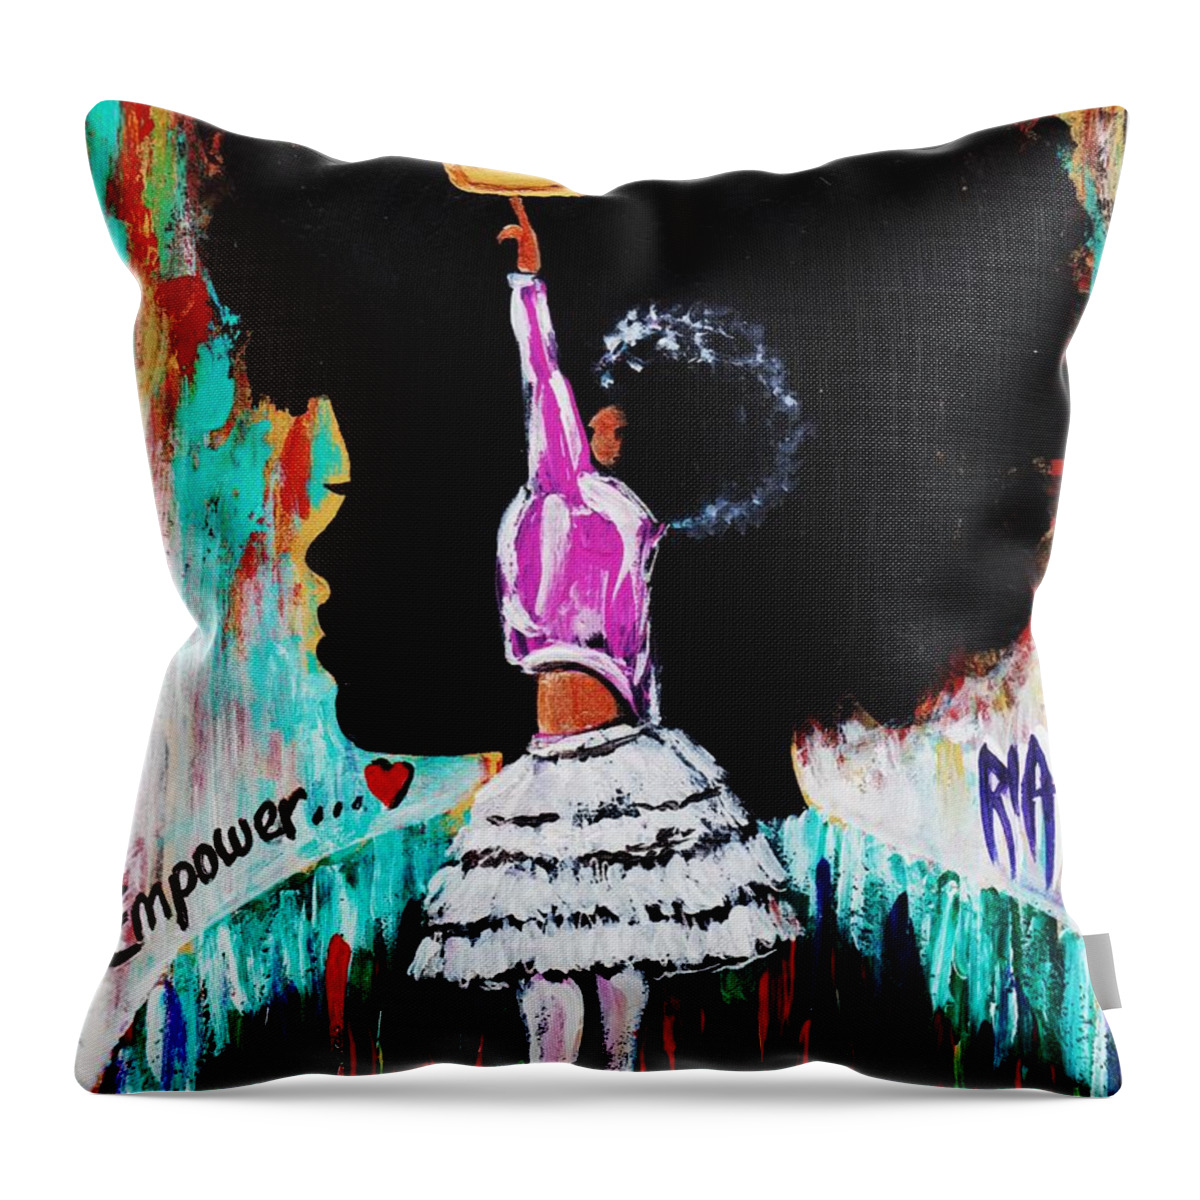 Artbyria Throw Pillow featuring the photograph Empower by Artist RiA